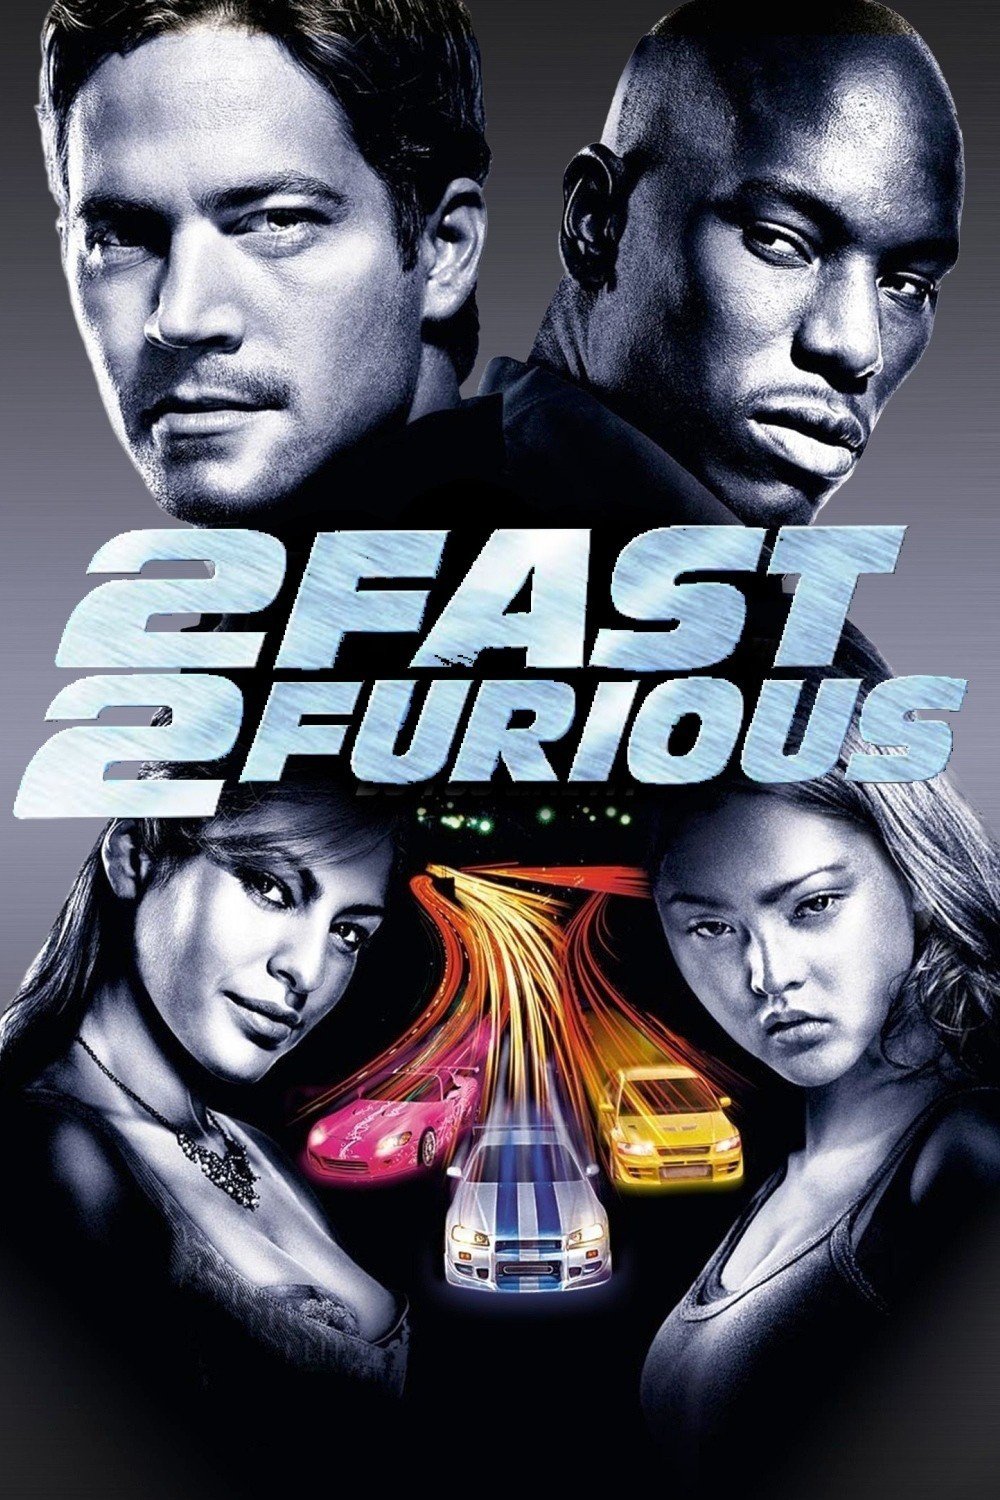 2 fast 2 furious full movie download yts